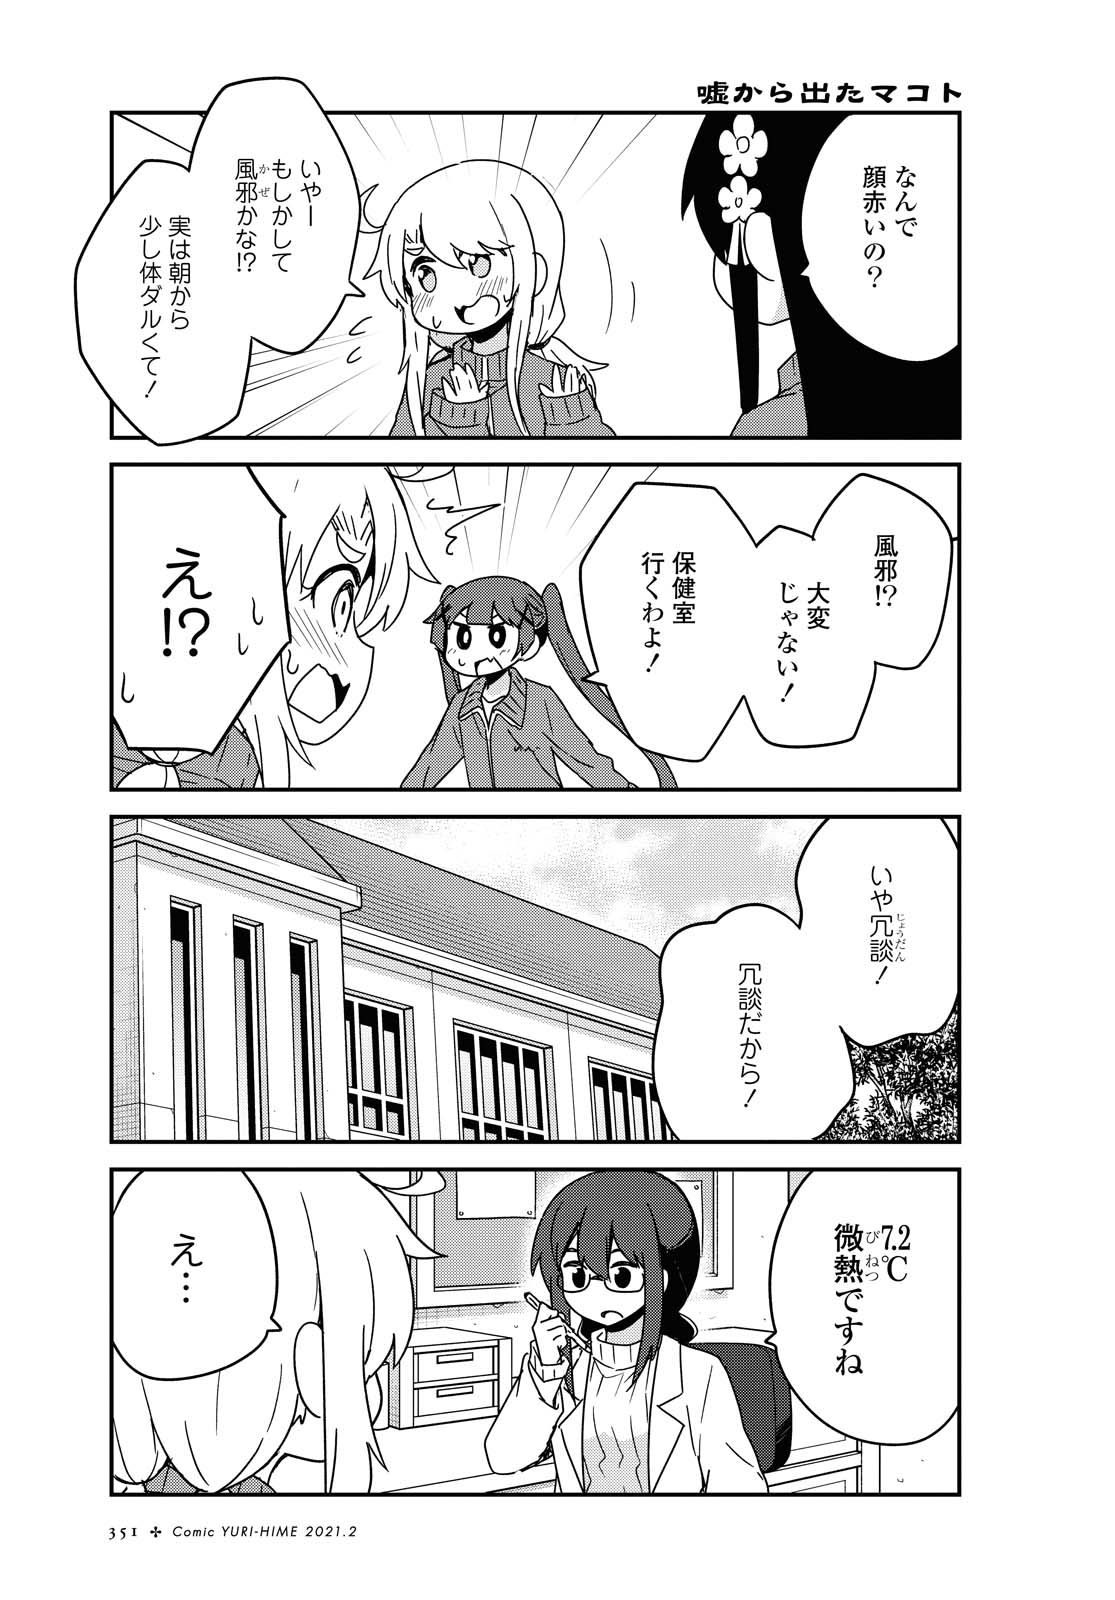 Wataten! An Angel Flew Down to Me 私に天使が舞い降りた！ 第76話 - Page 3